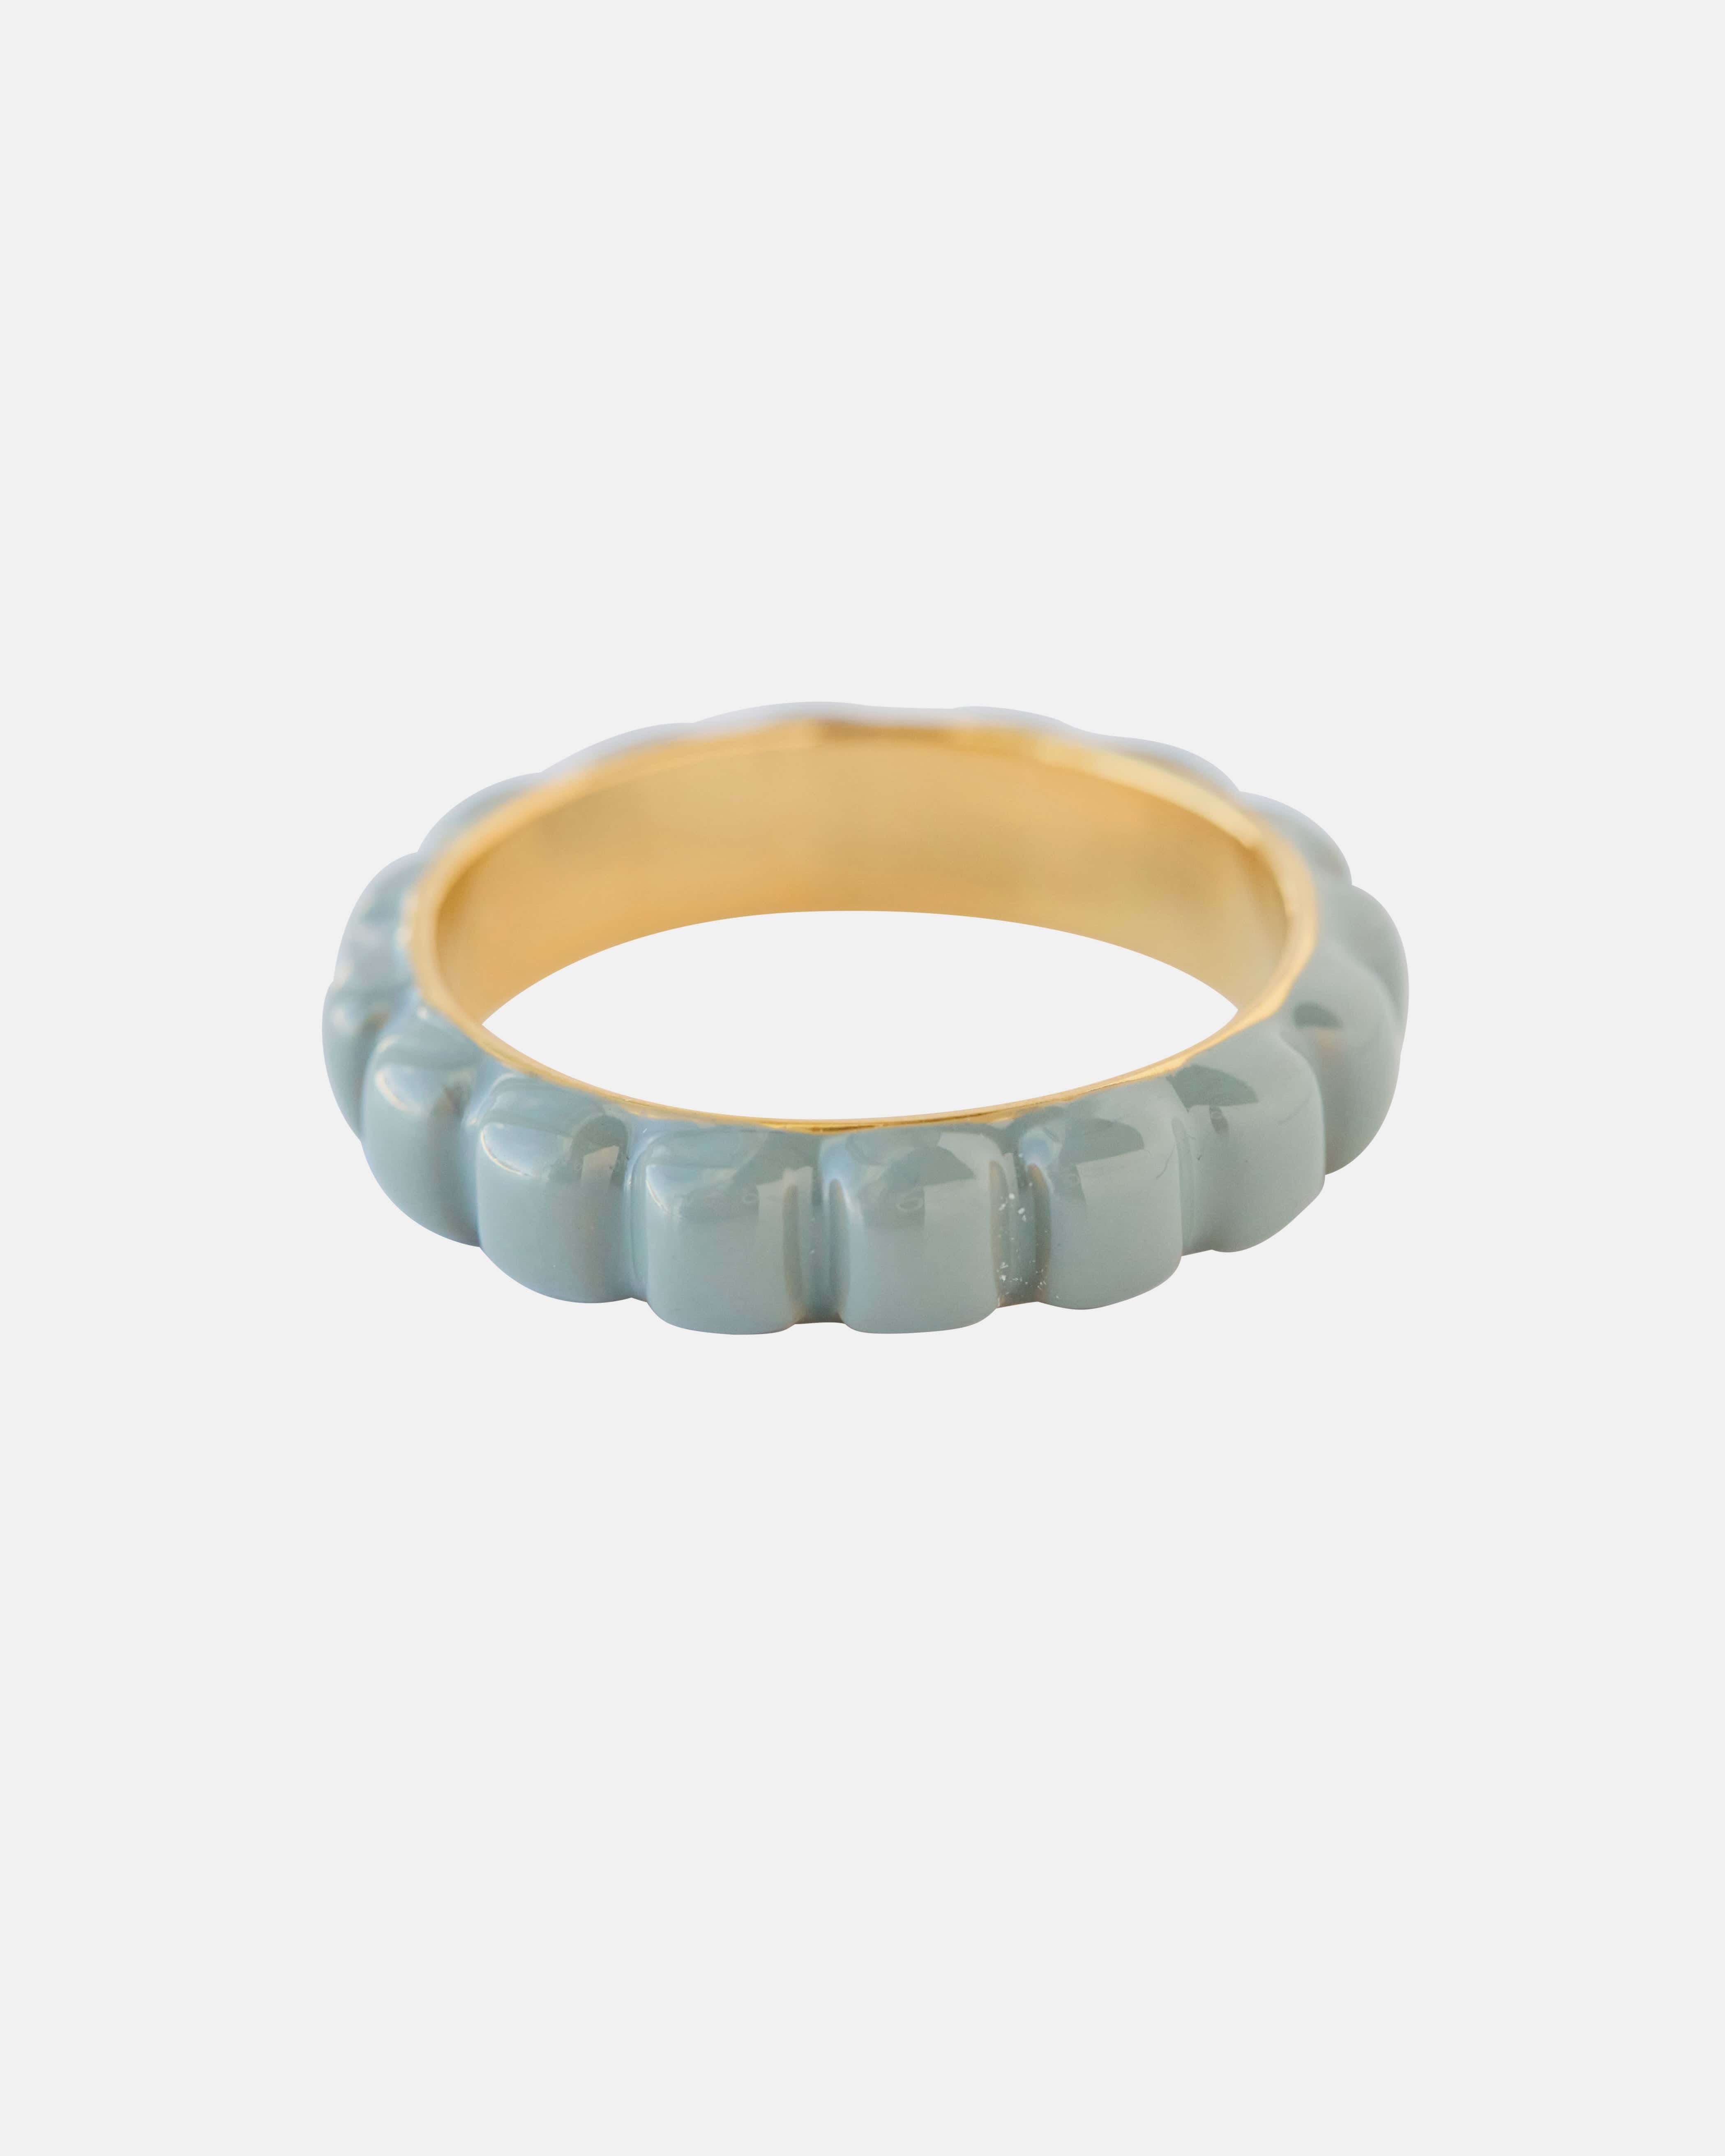 Gold and blue ring